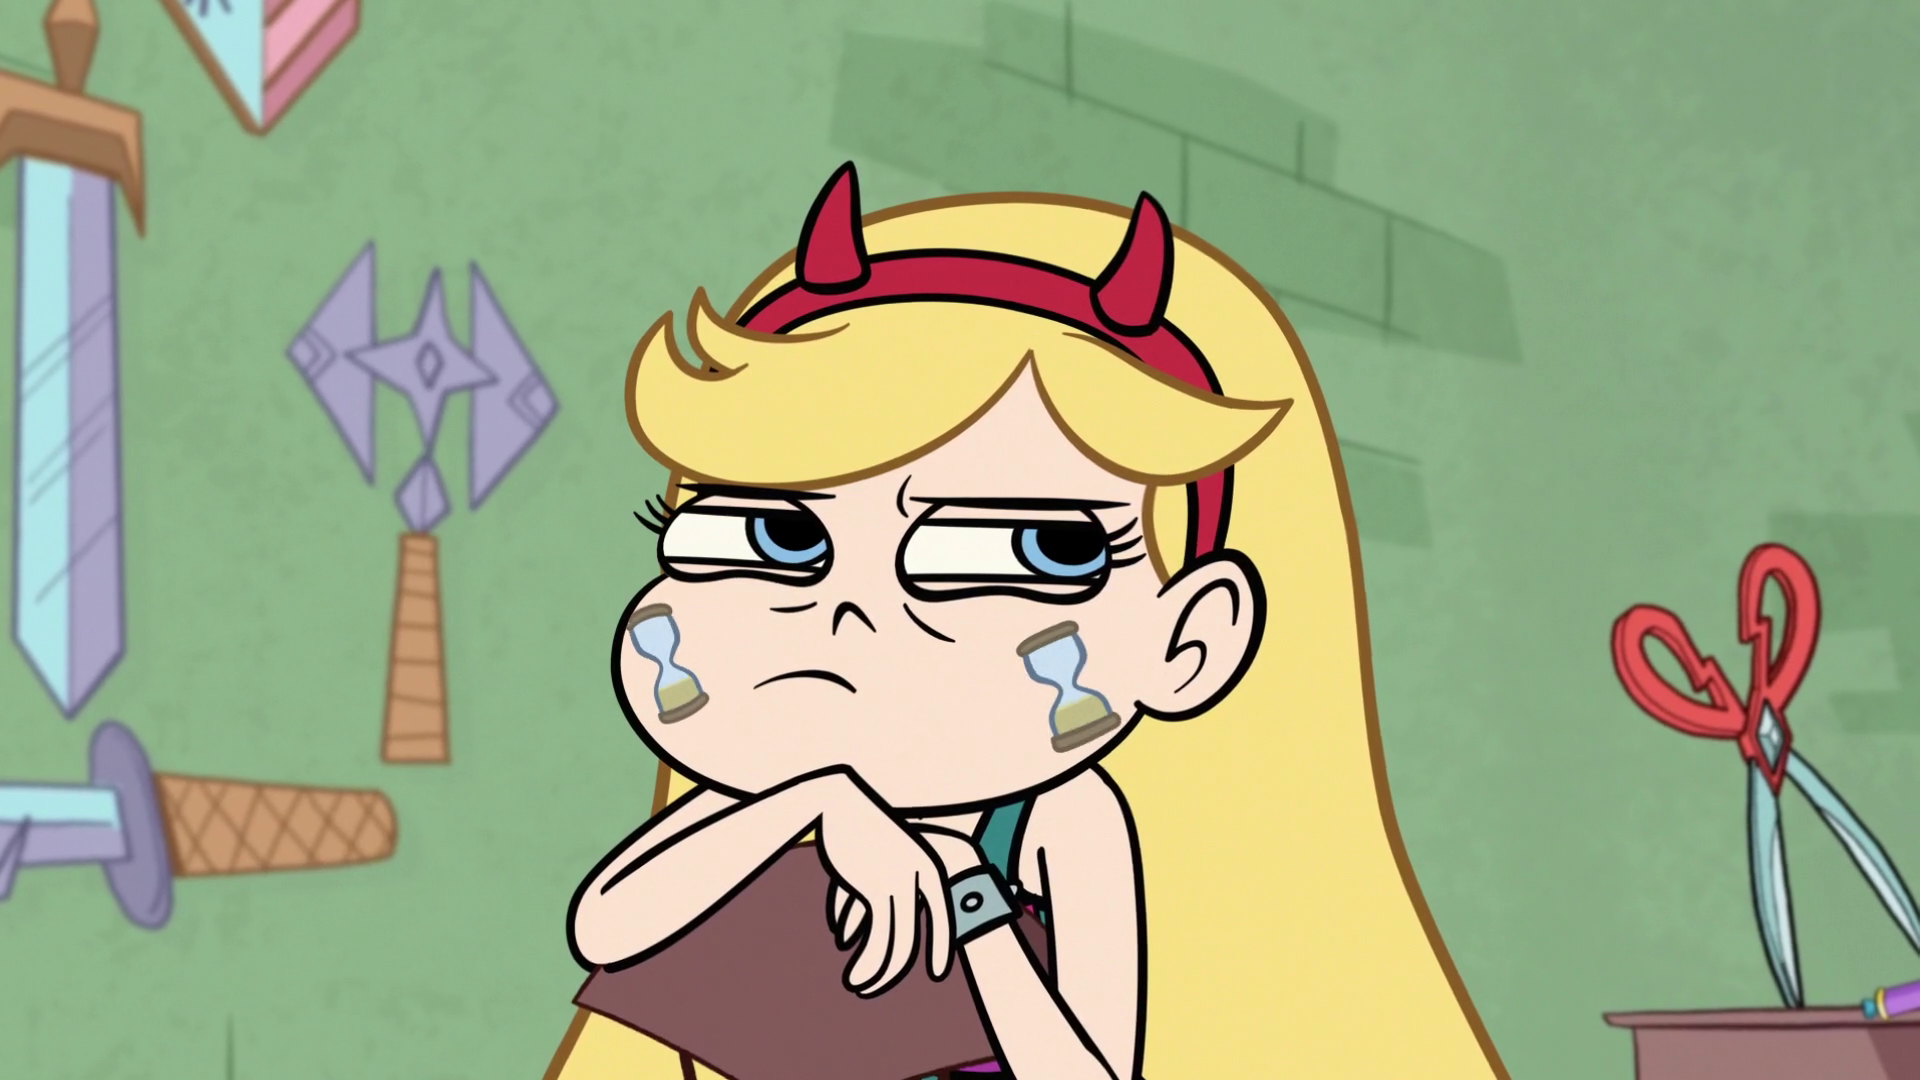 S2E16 Star Butterfly bored of